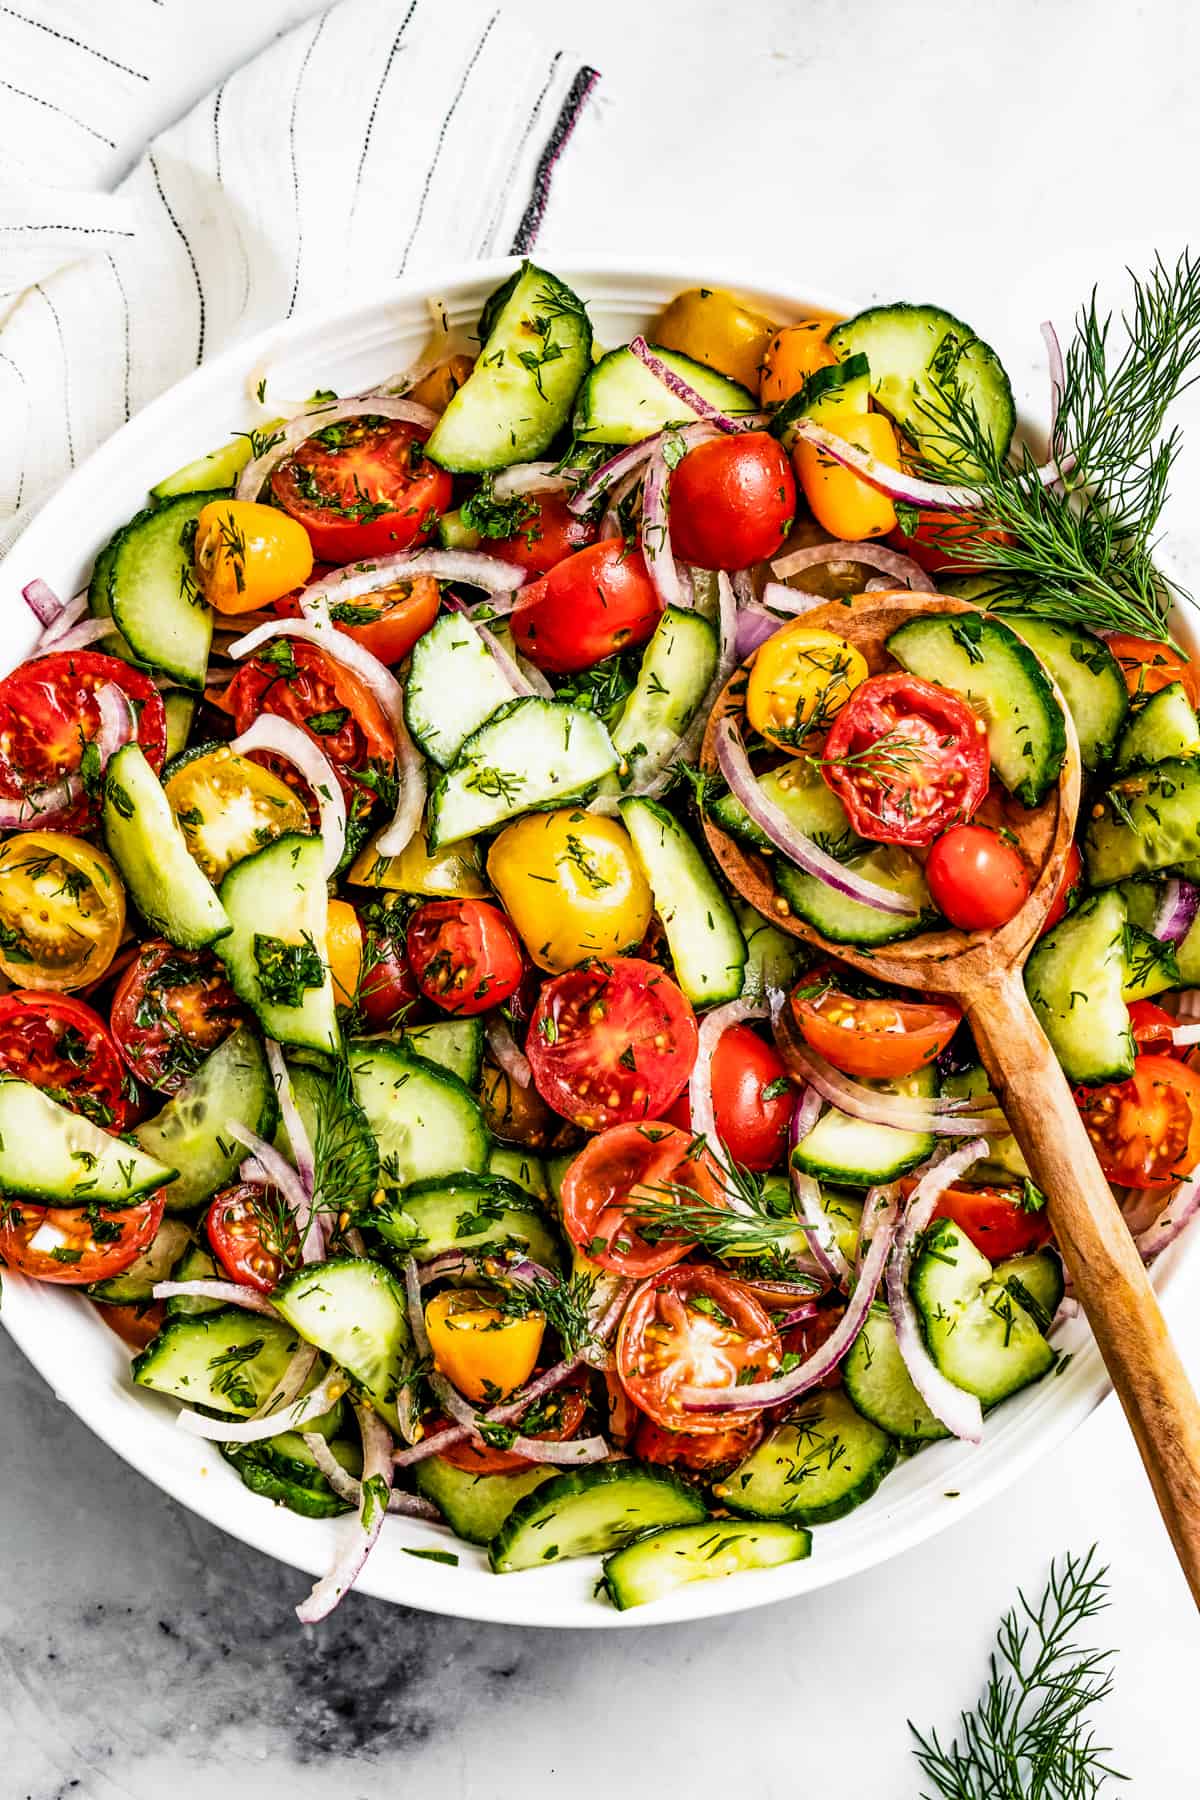 Tomato and cucumber salad in a serving bowl with a wooden spoon.